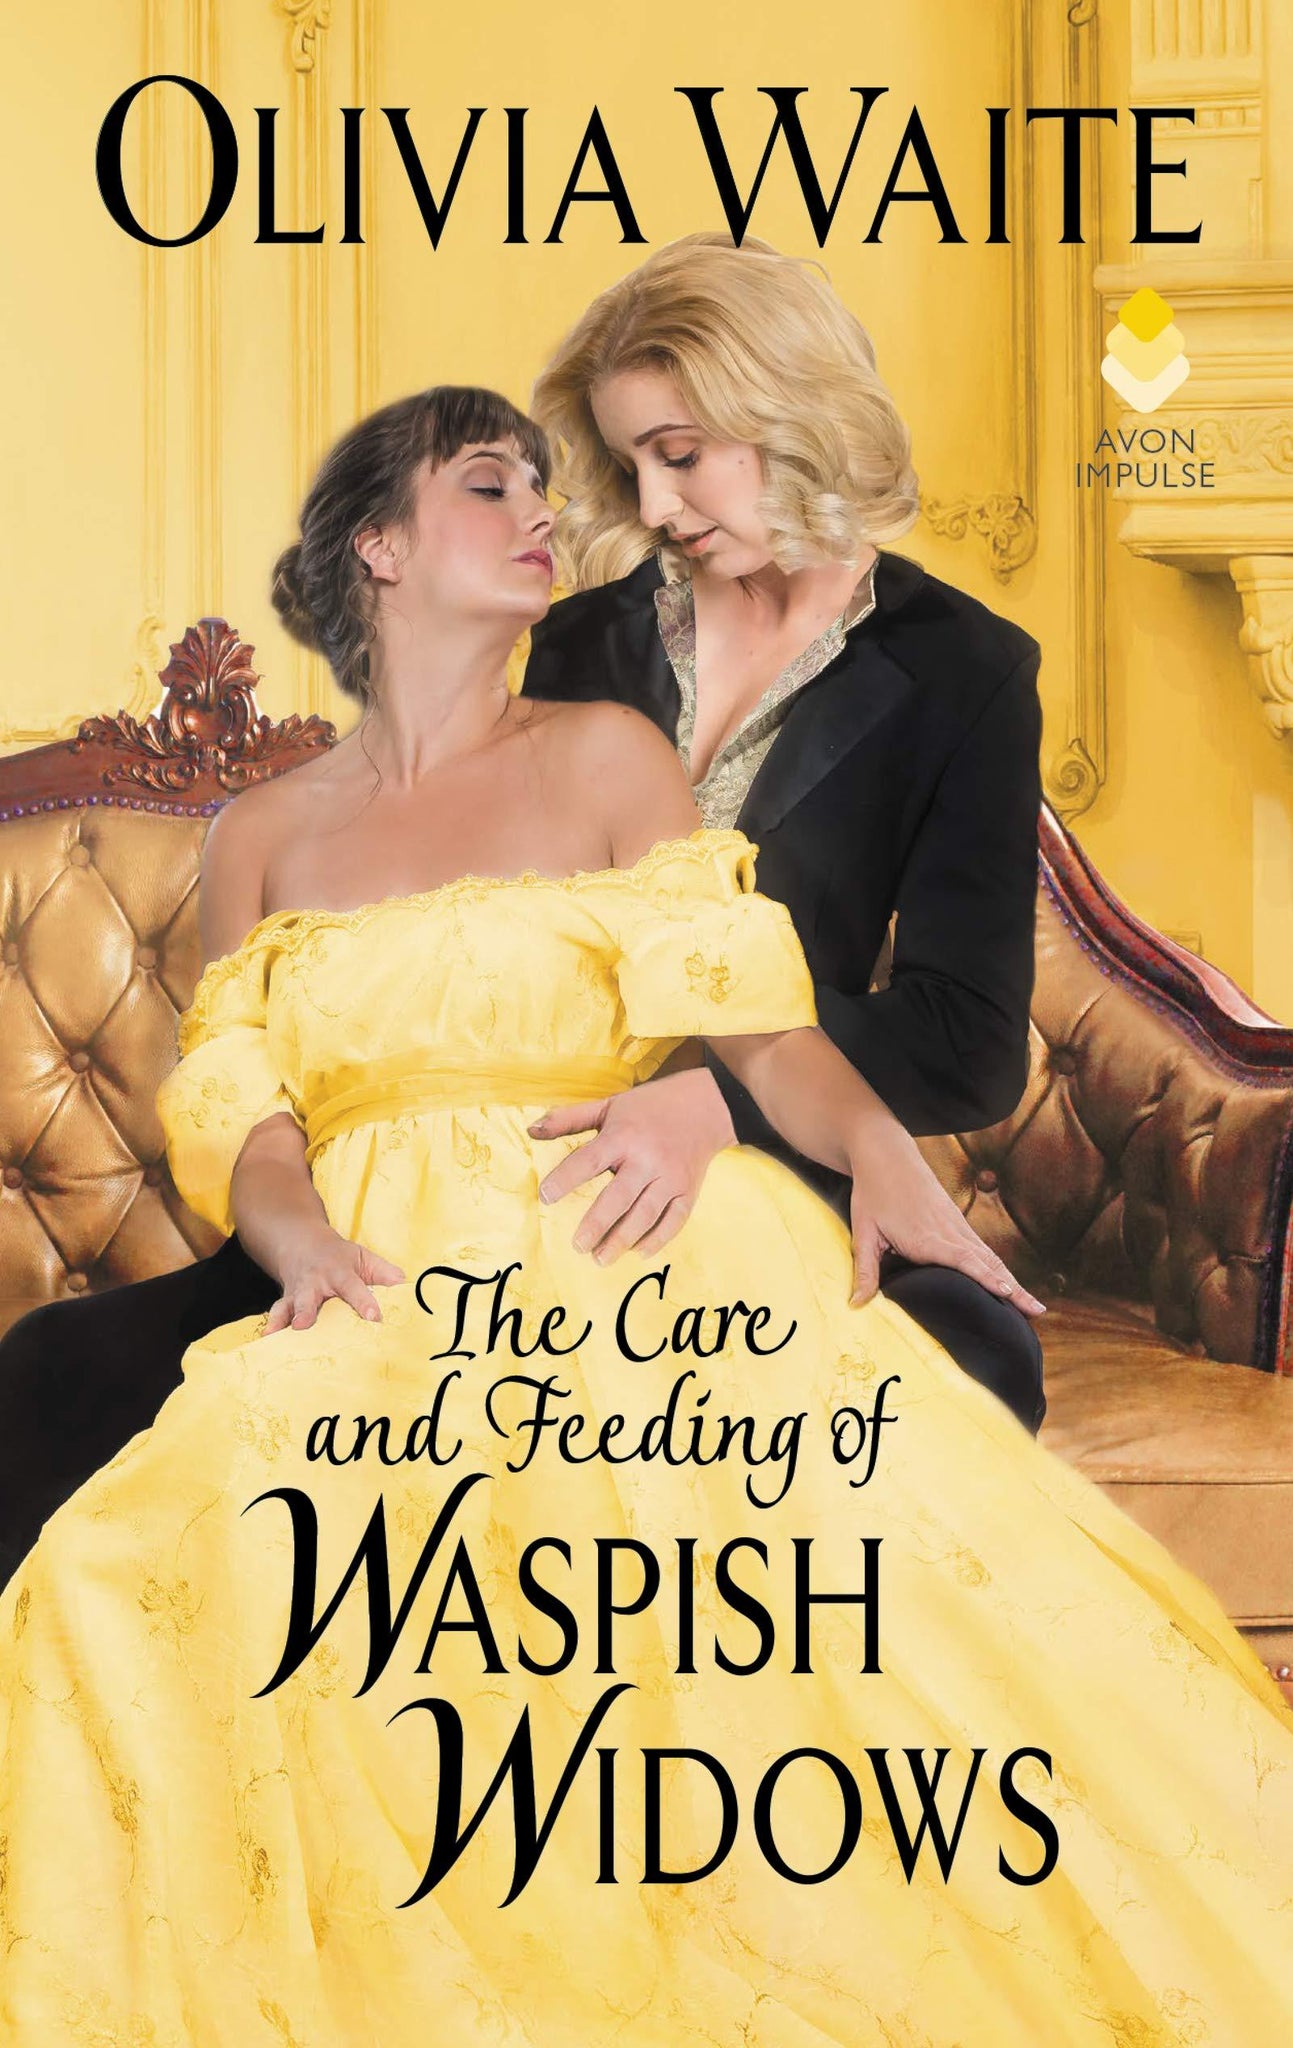 The Care and Feeding of Waspish Widows: Feminine Pursuits - ShopQueer.co